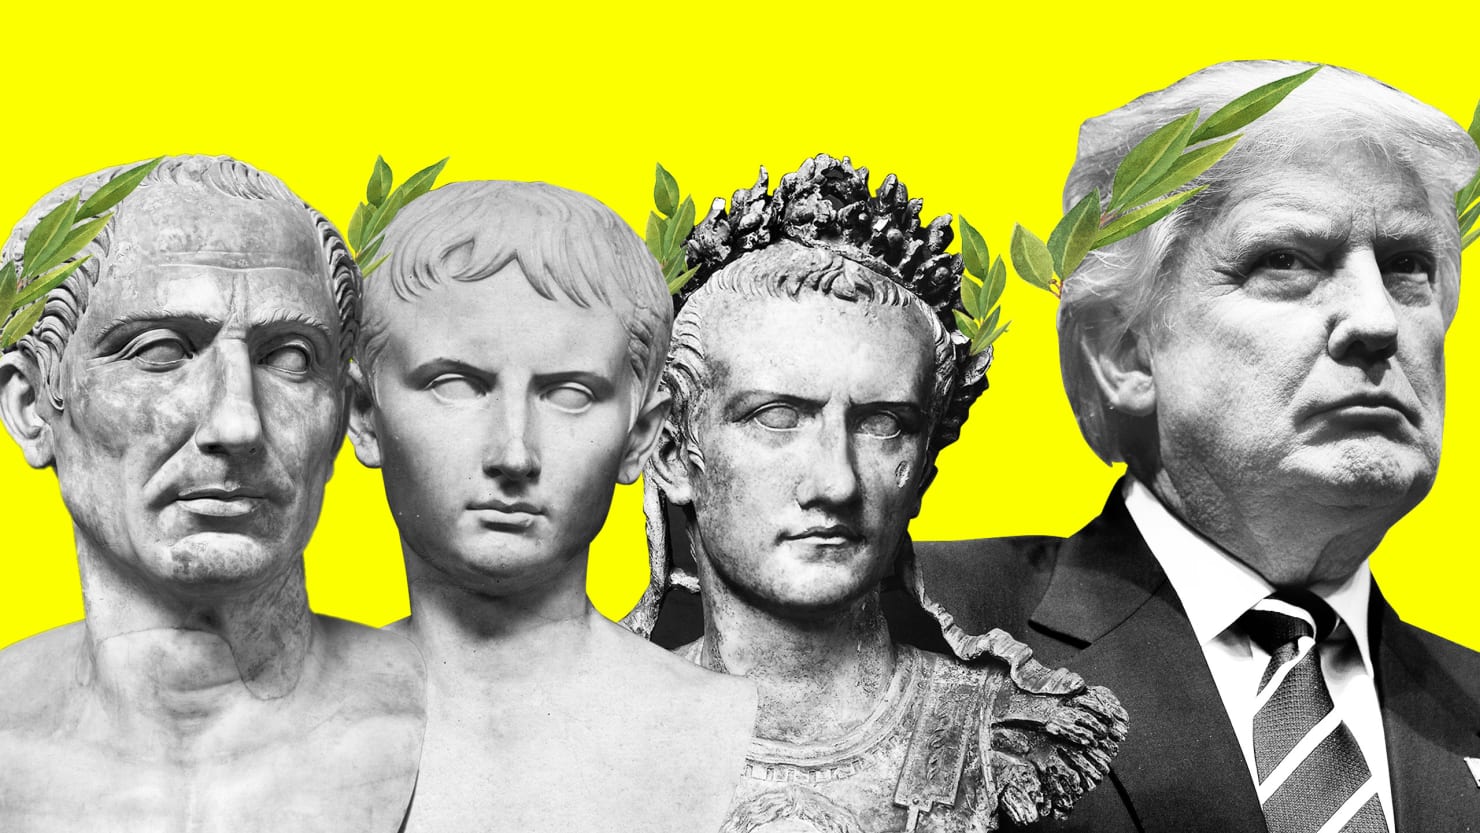 Trump Is No Orange 'Julius,' but He Does Share Traits With Other Tyrants of Rome